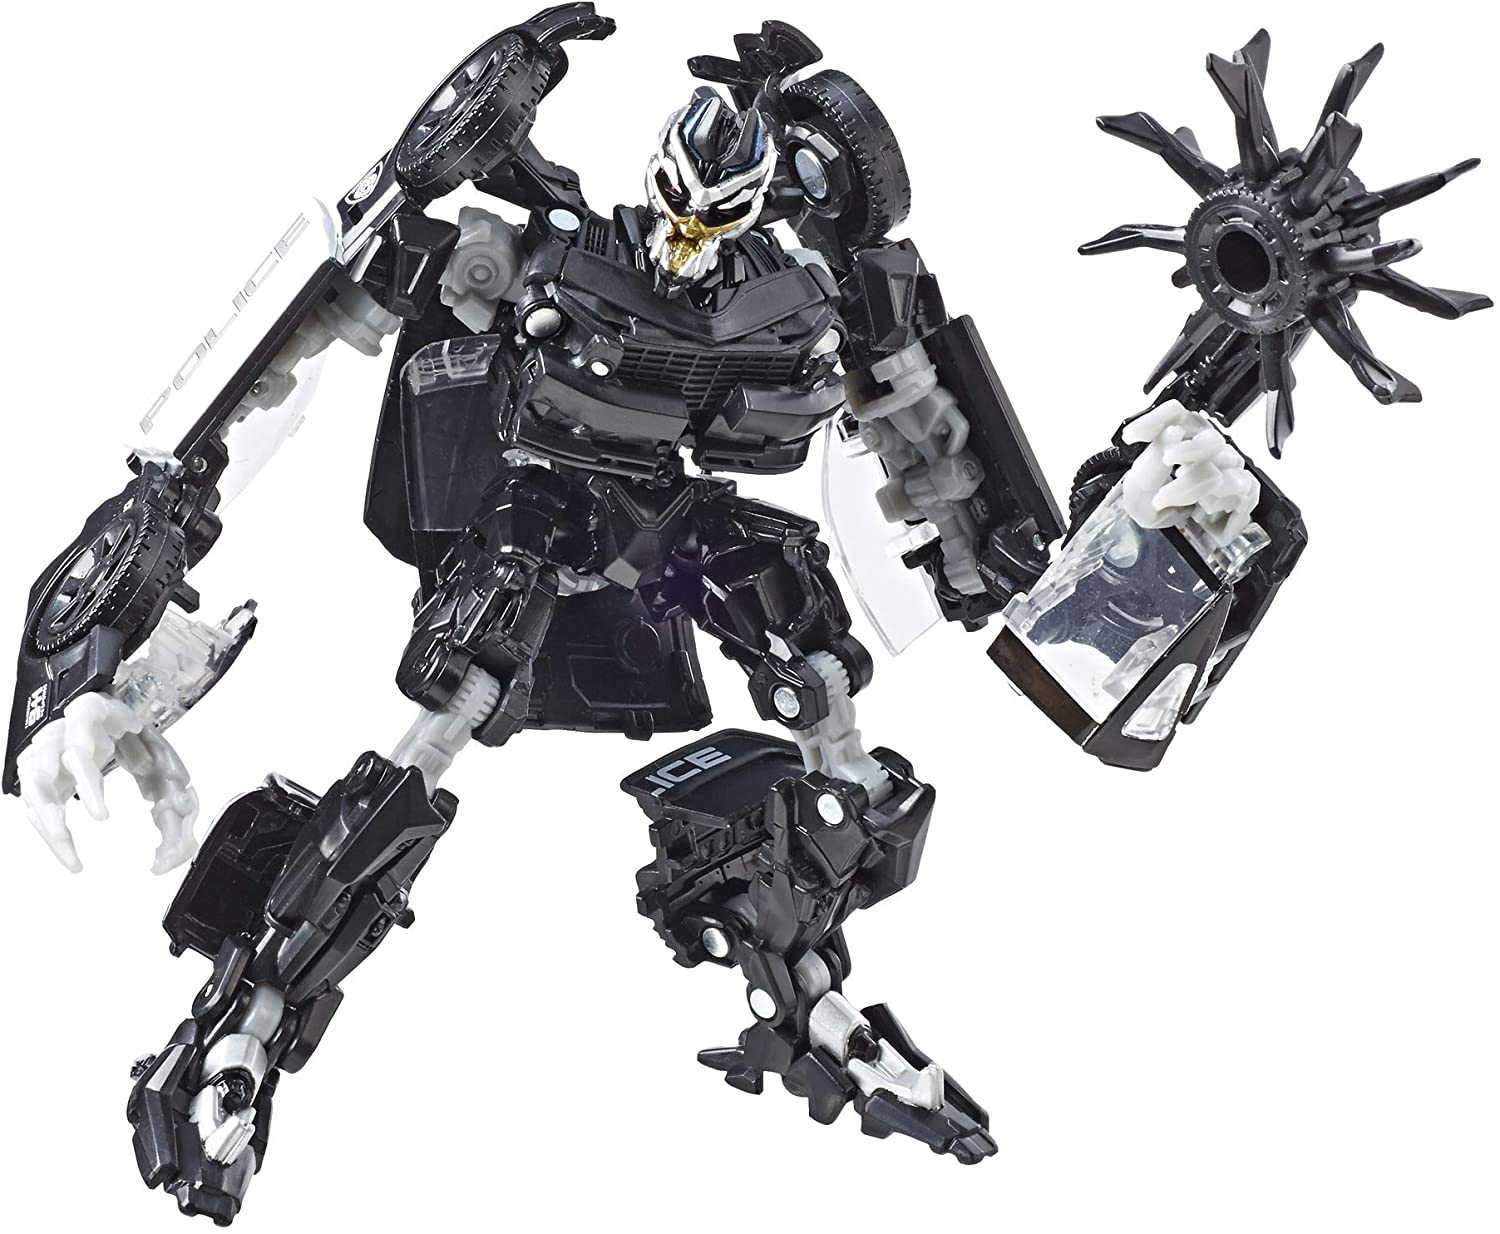 Transformers Studio Series 28 Deluxe Class Movie 1 Barricade Action Figure: Toys & Games